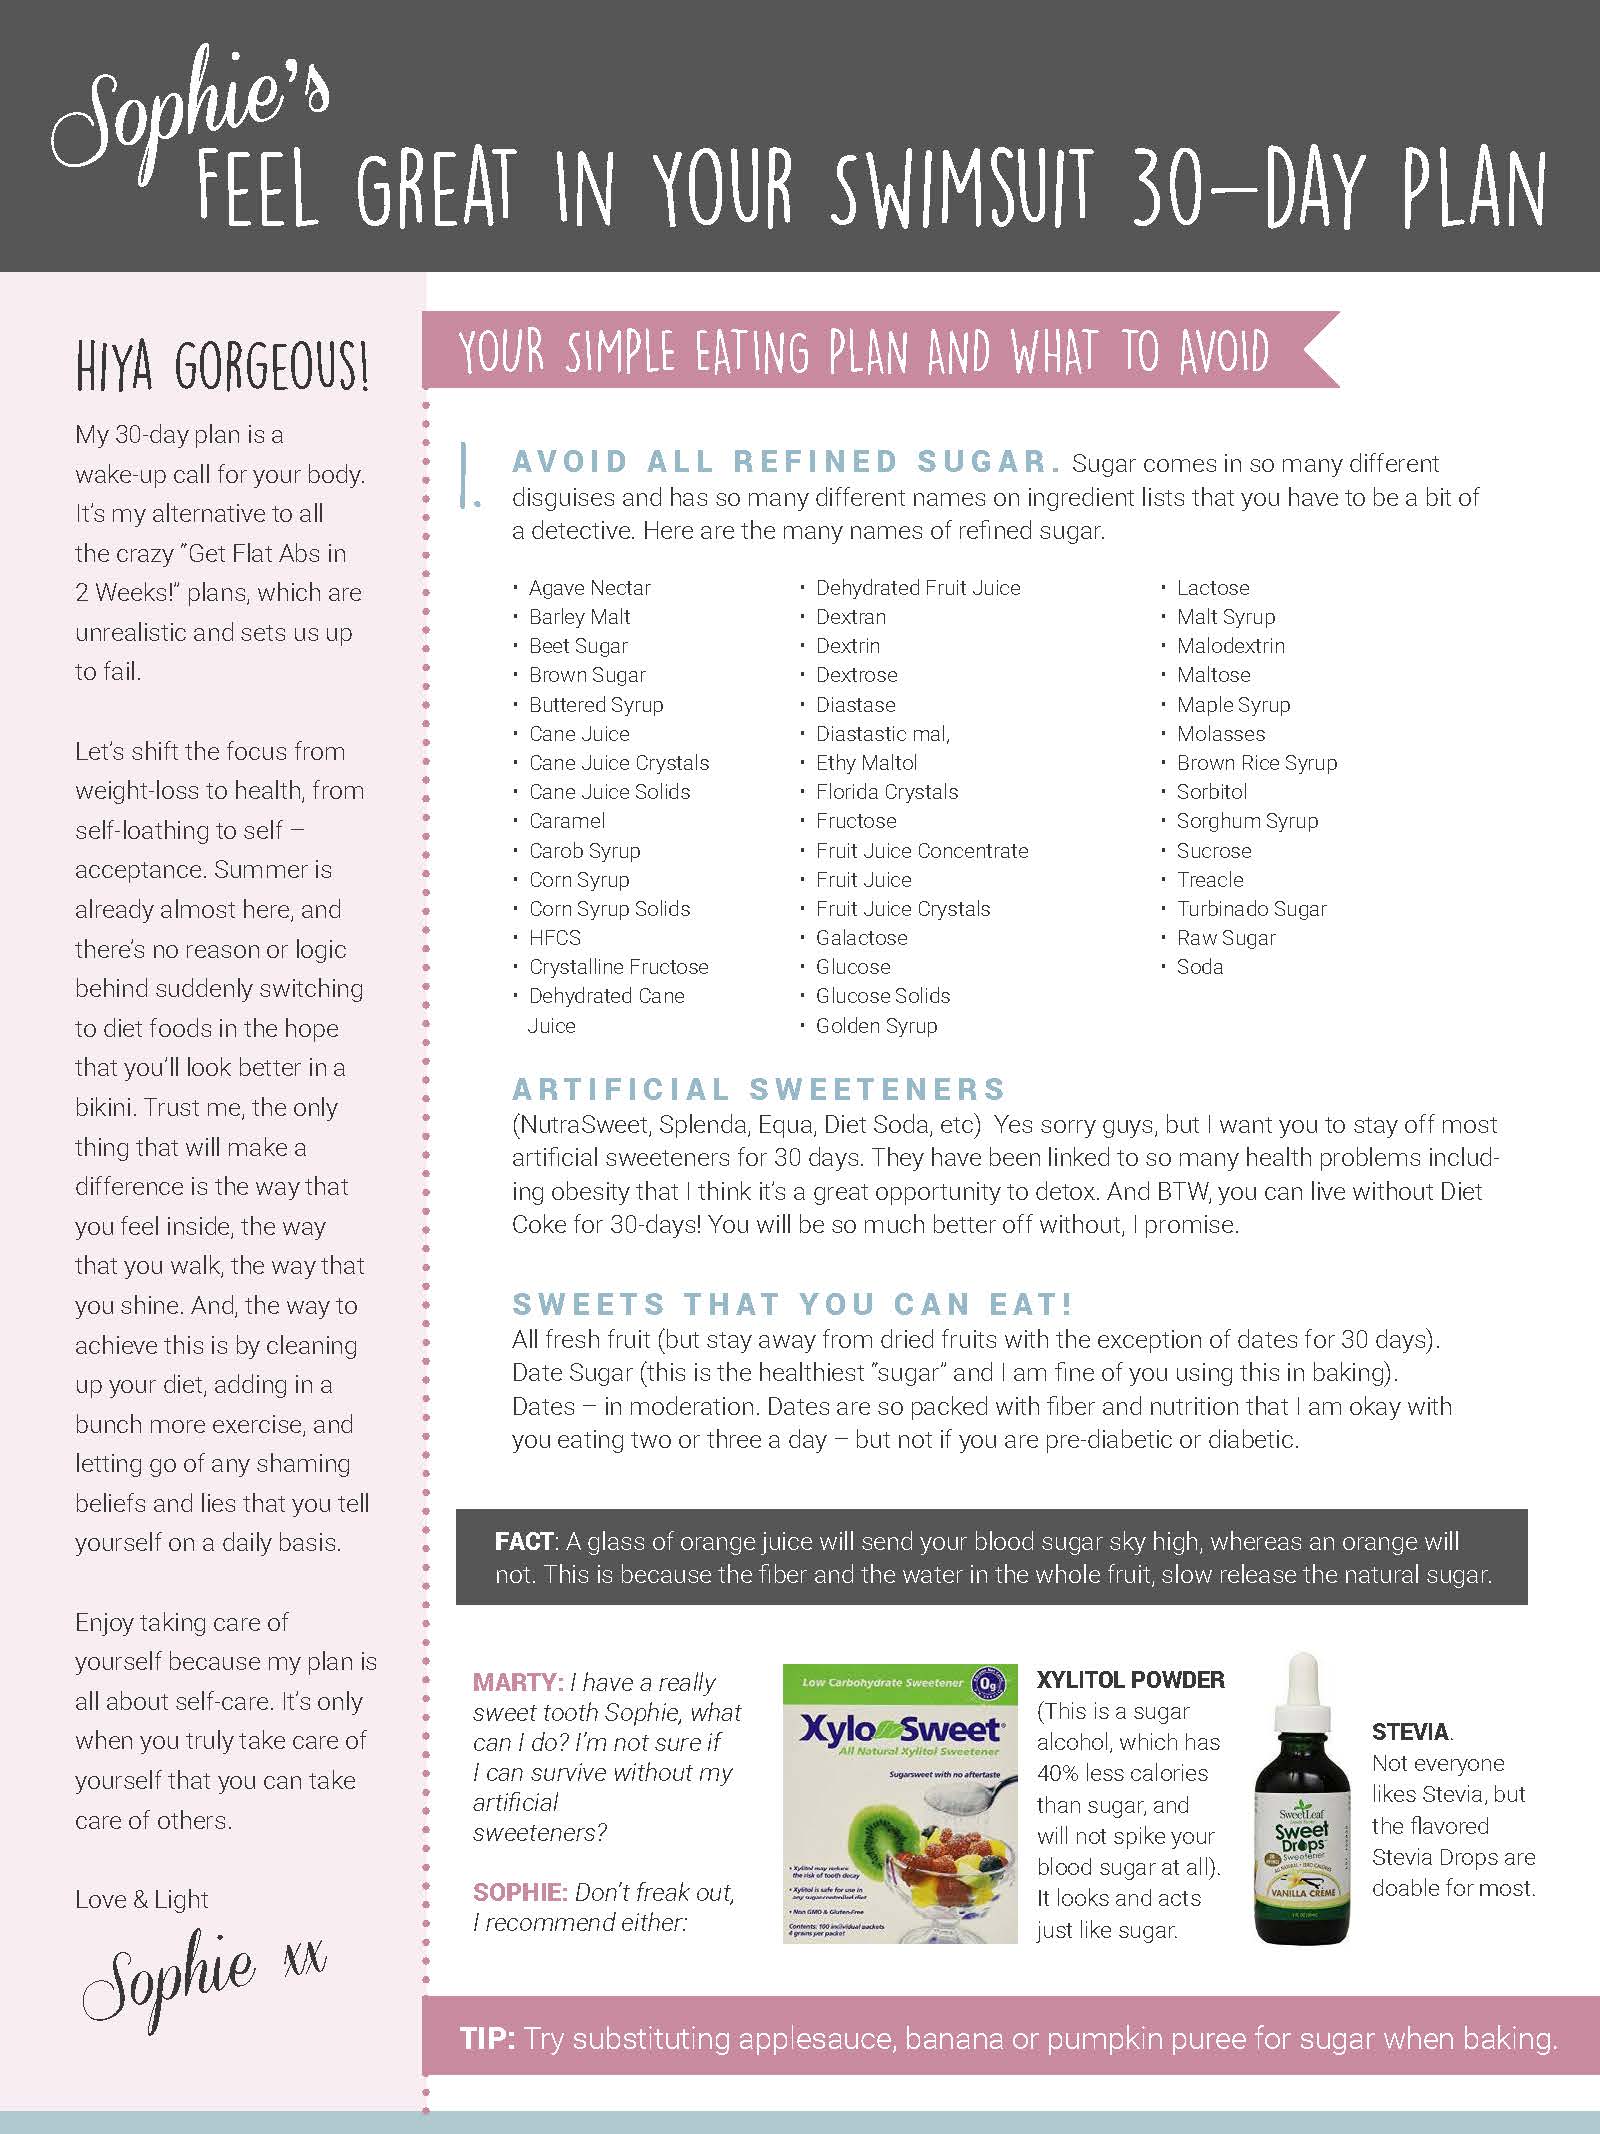 Feel Great In Your Swimsuit 30-day Plan_Revised_1_Page_1